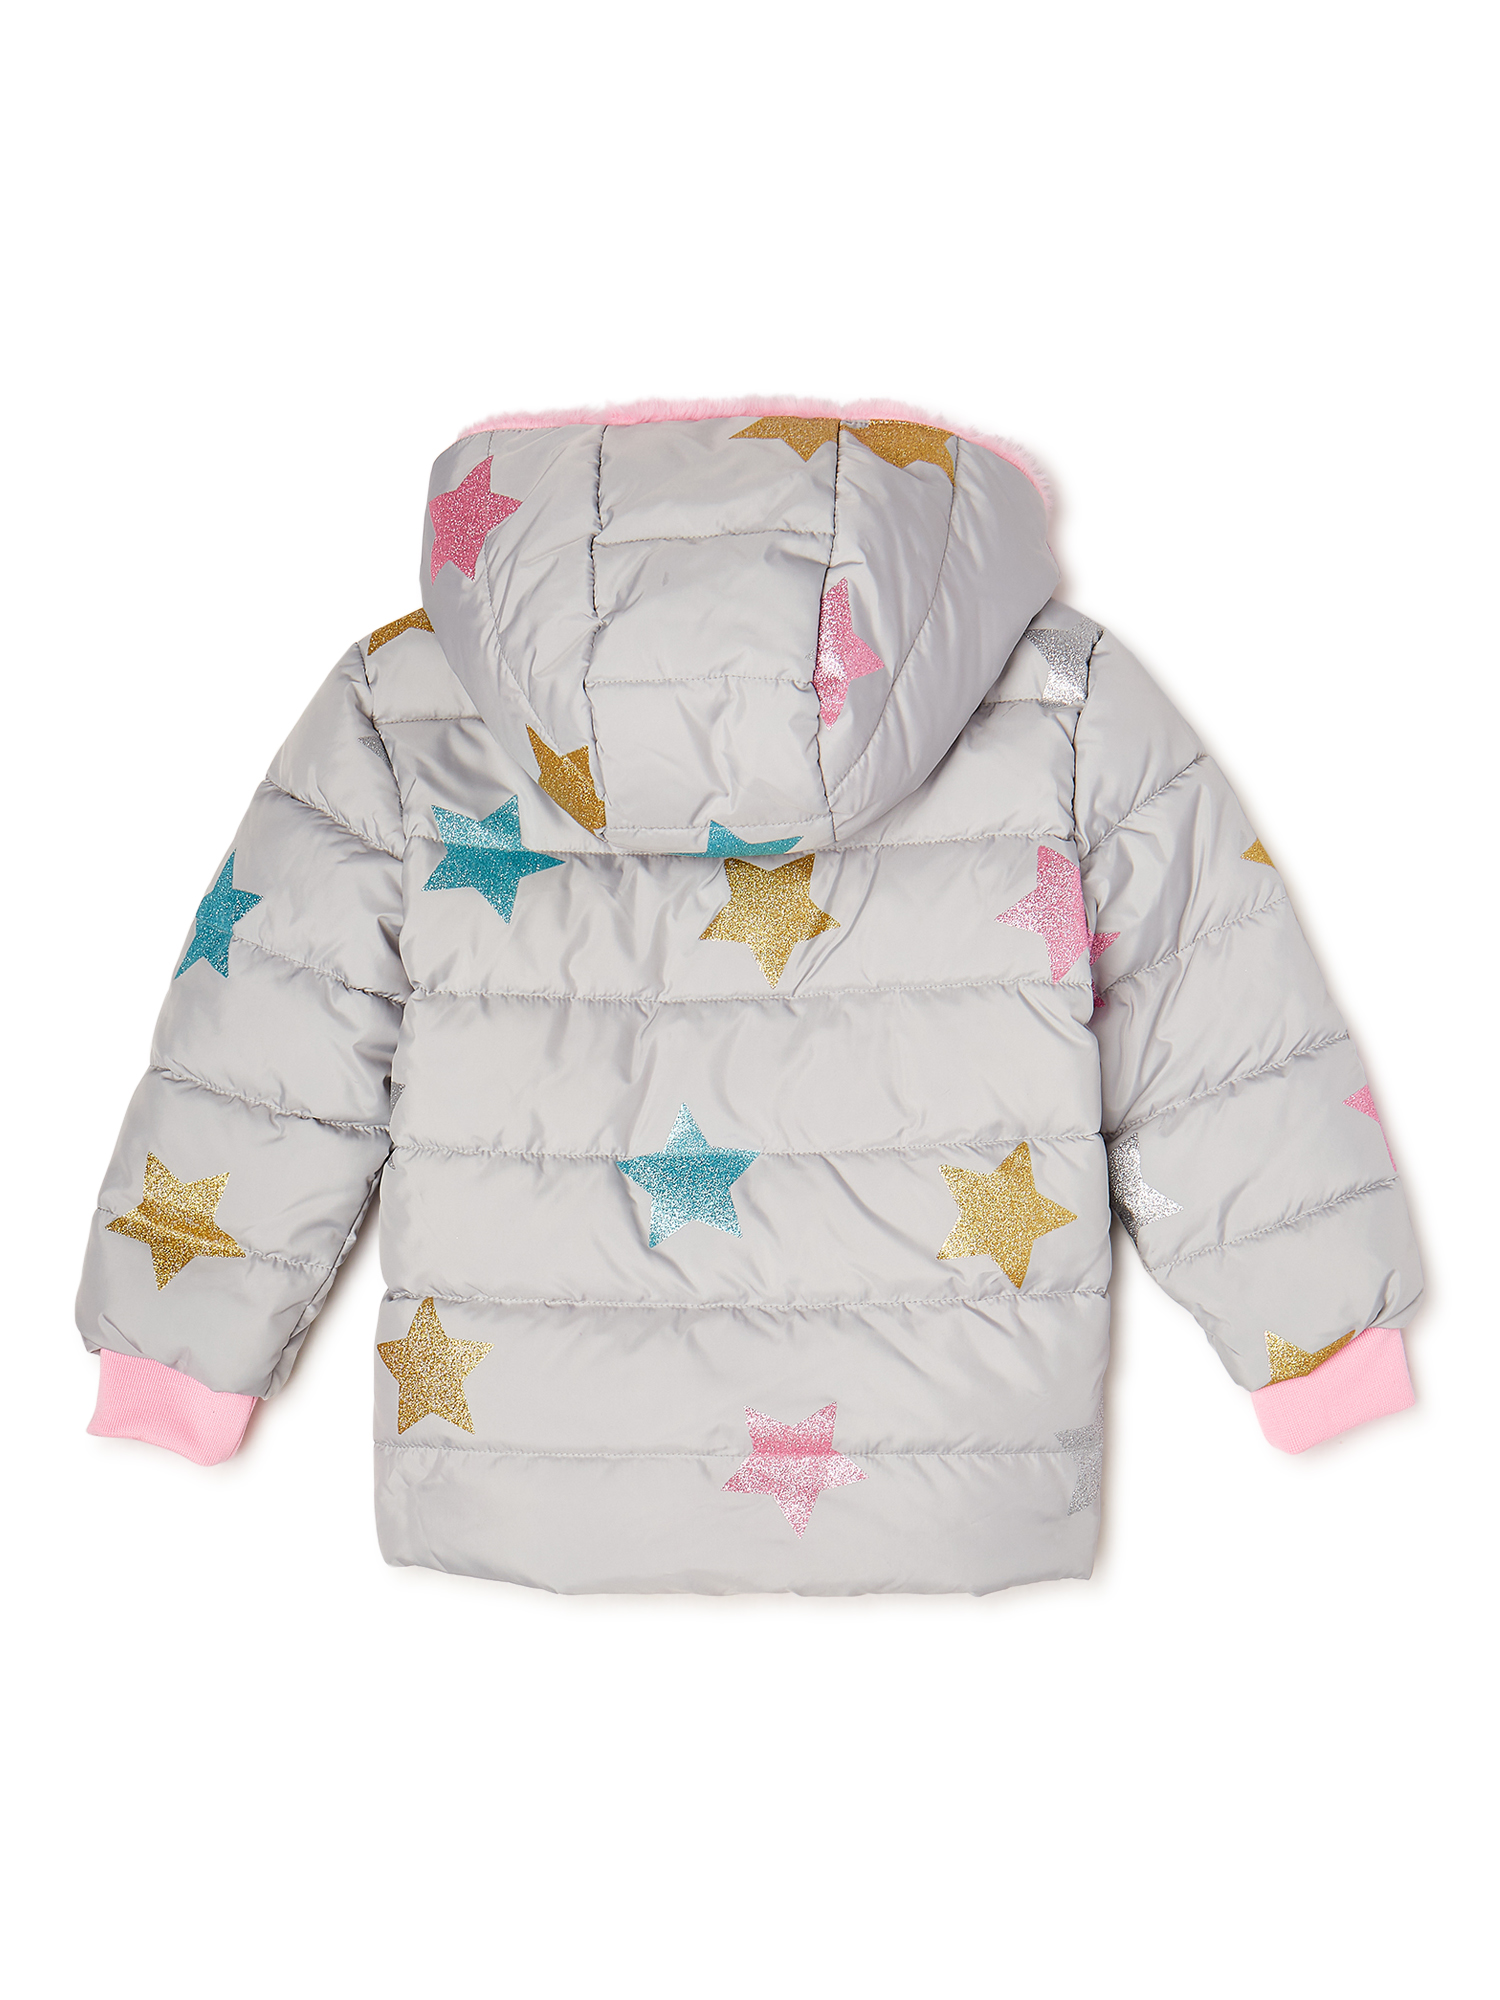 Swiss Tech Baby and Toddler Girl Puffer Jacket, Sizes 12M-5T - image 3 of 3